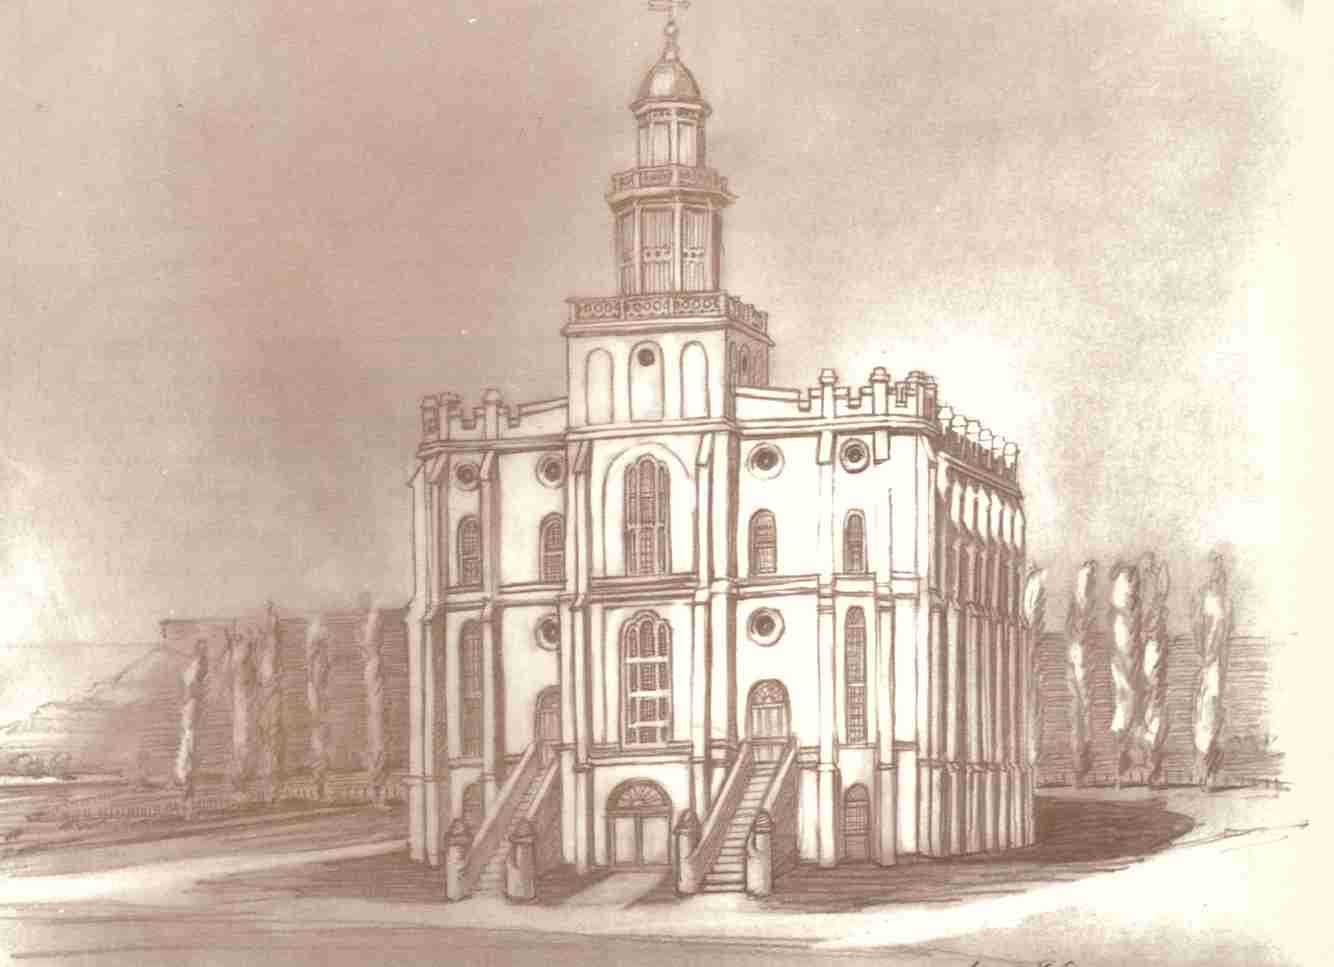 Sketch of the St. George Temple